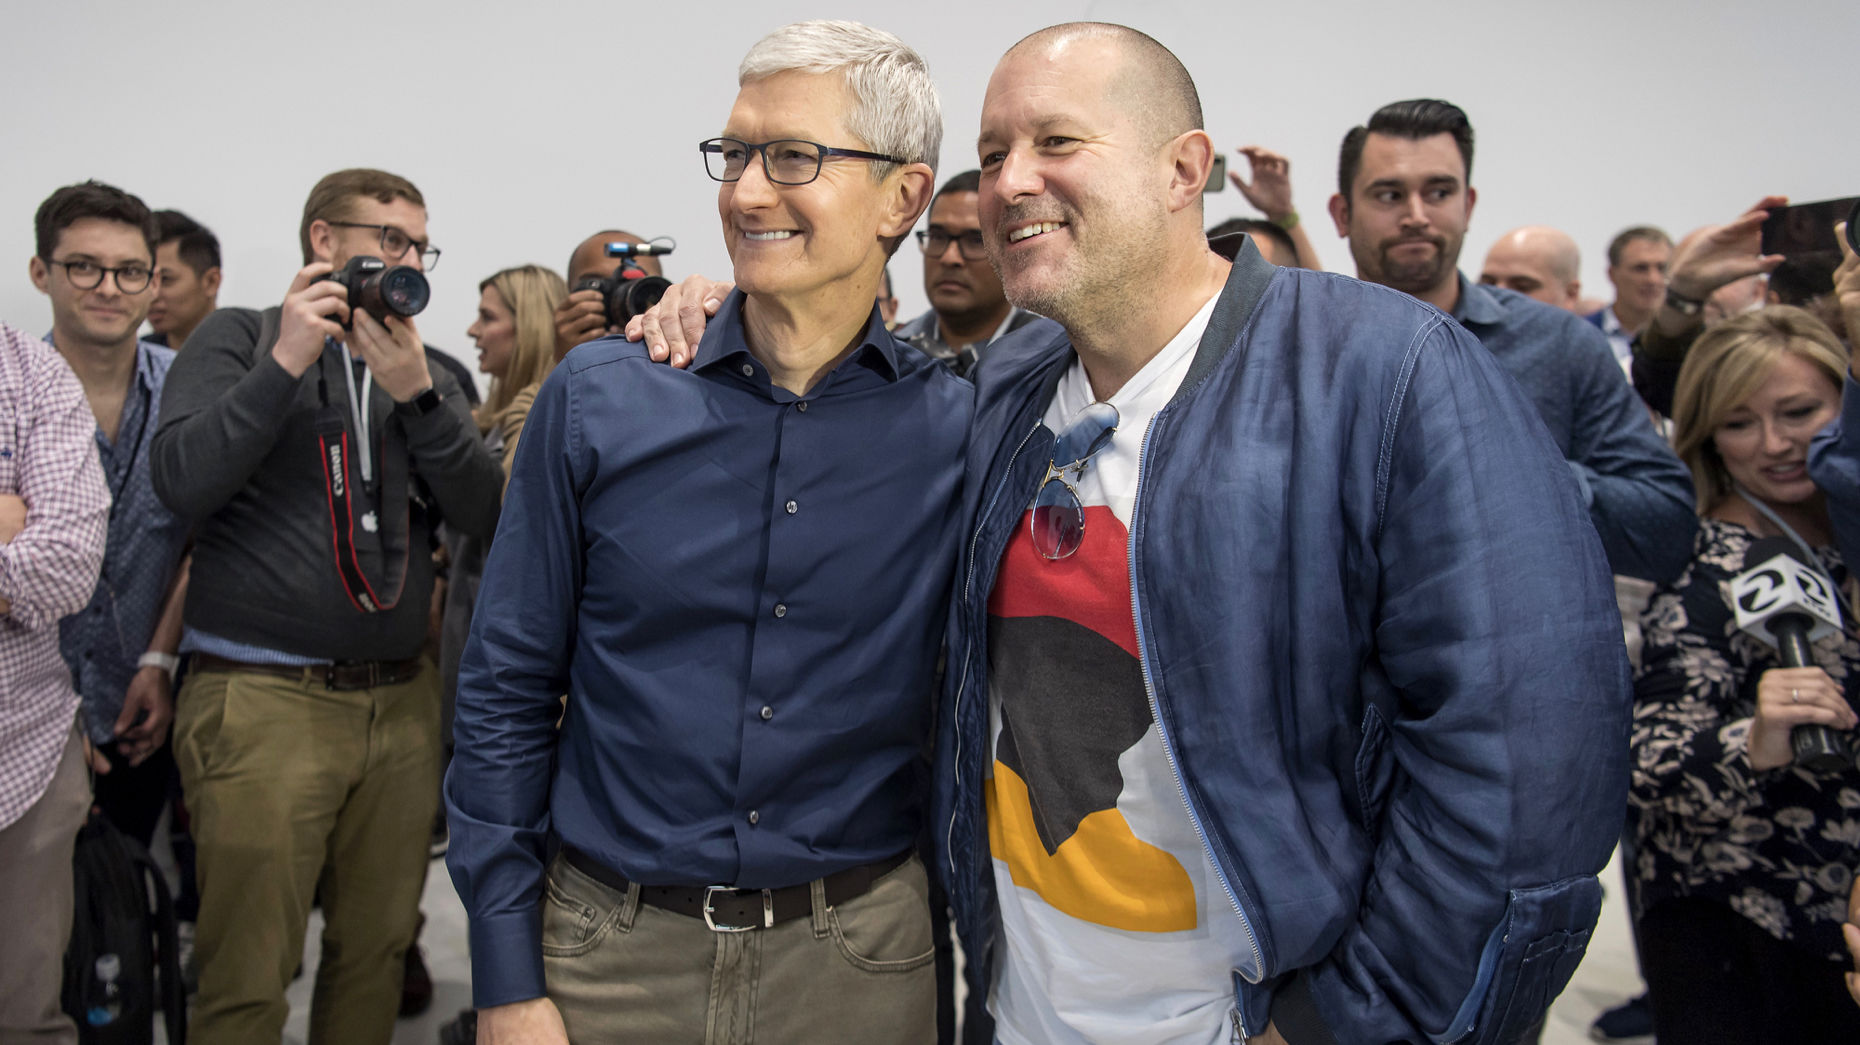 Tim Cook calls "nonsense" story about Jony Ive leaving Apple